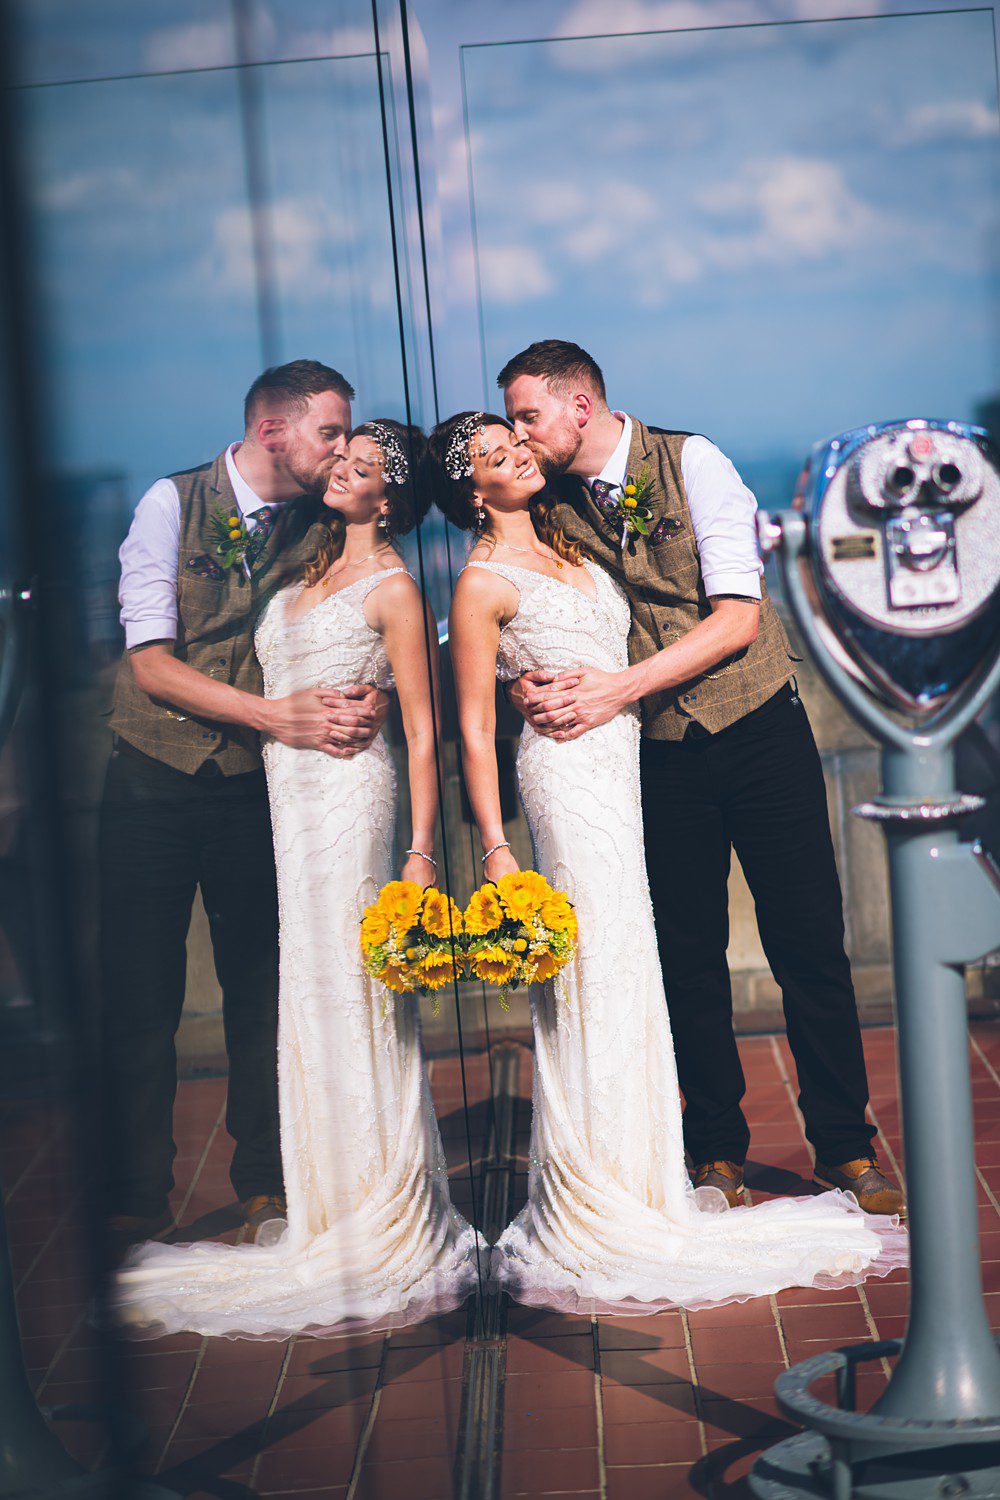 Jackie & Sascha, the New York City Elopement Team - all inclusive NYC wedding packages